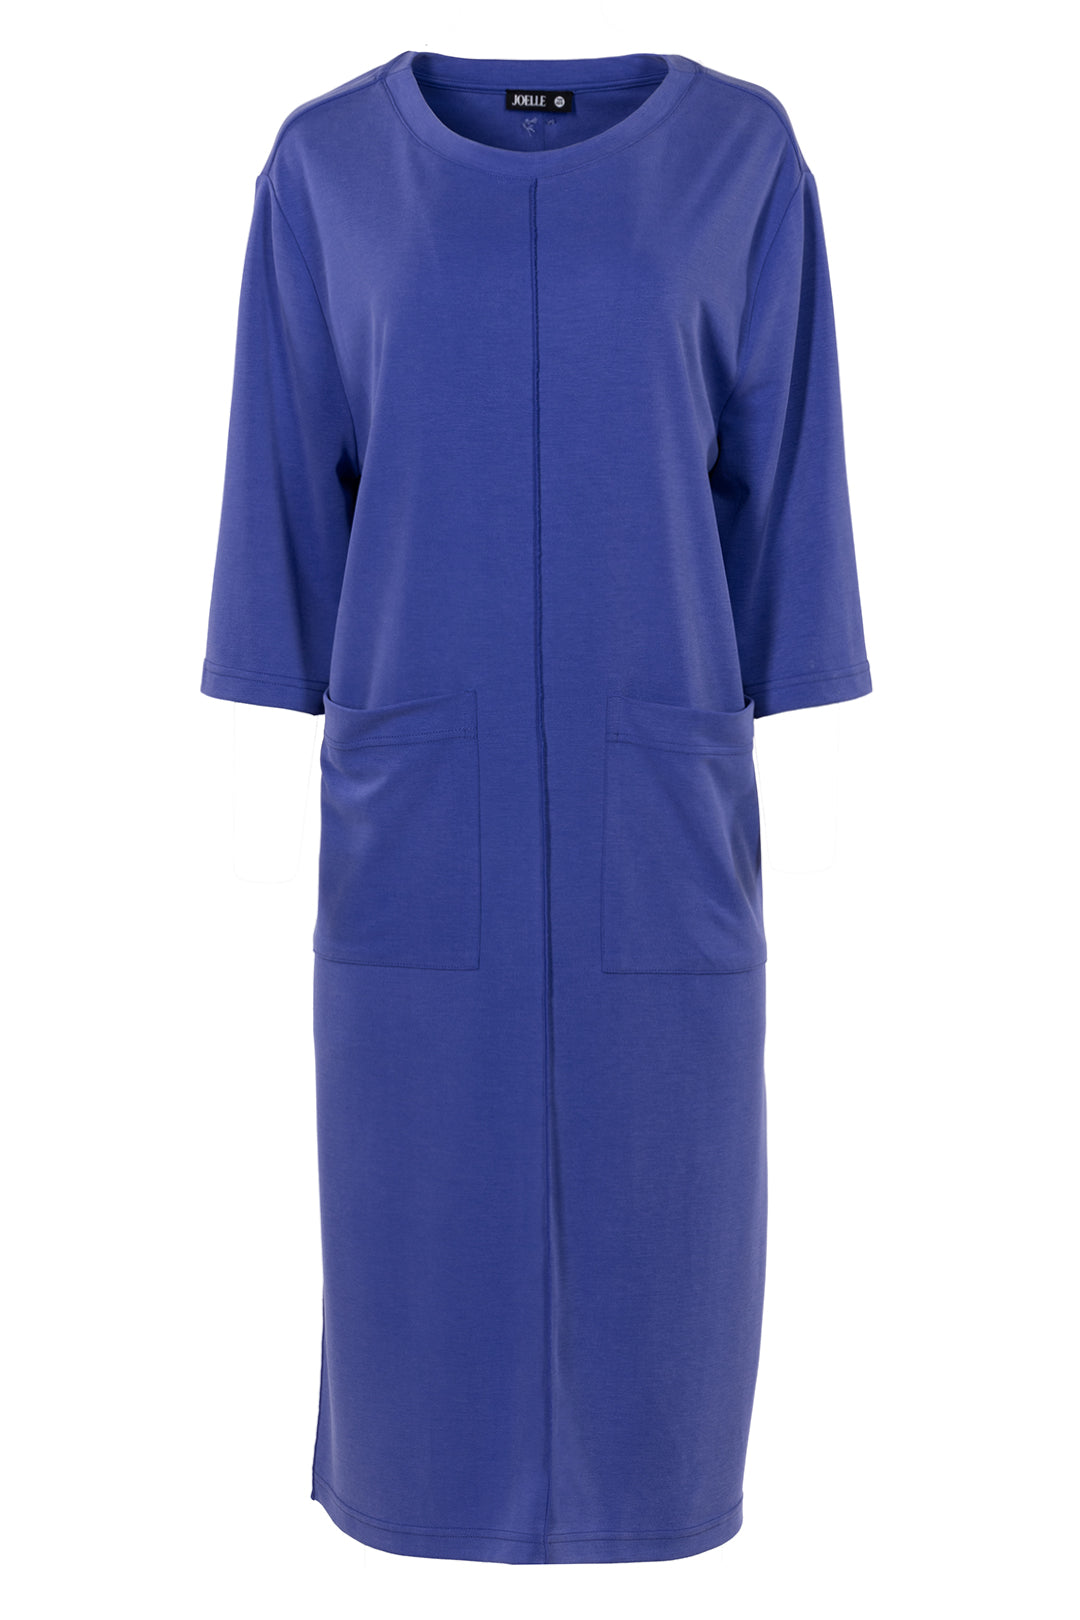 Royal blue tunic sweater with pockets | Henry